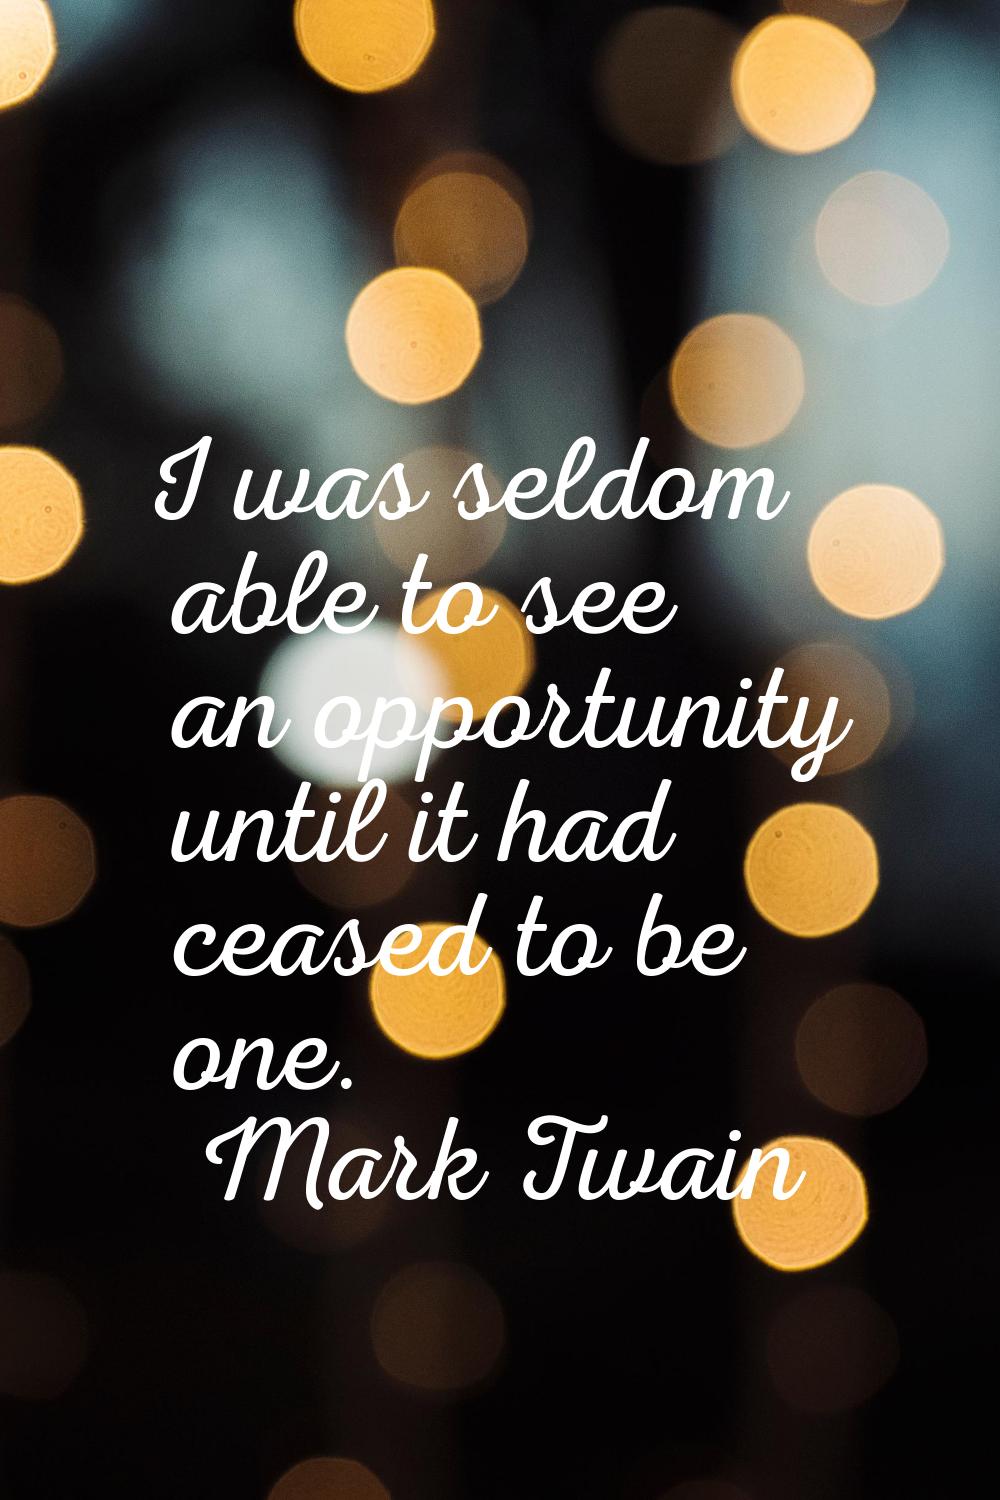 I was seldom able to see an opportunity until it had ceased to be one.